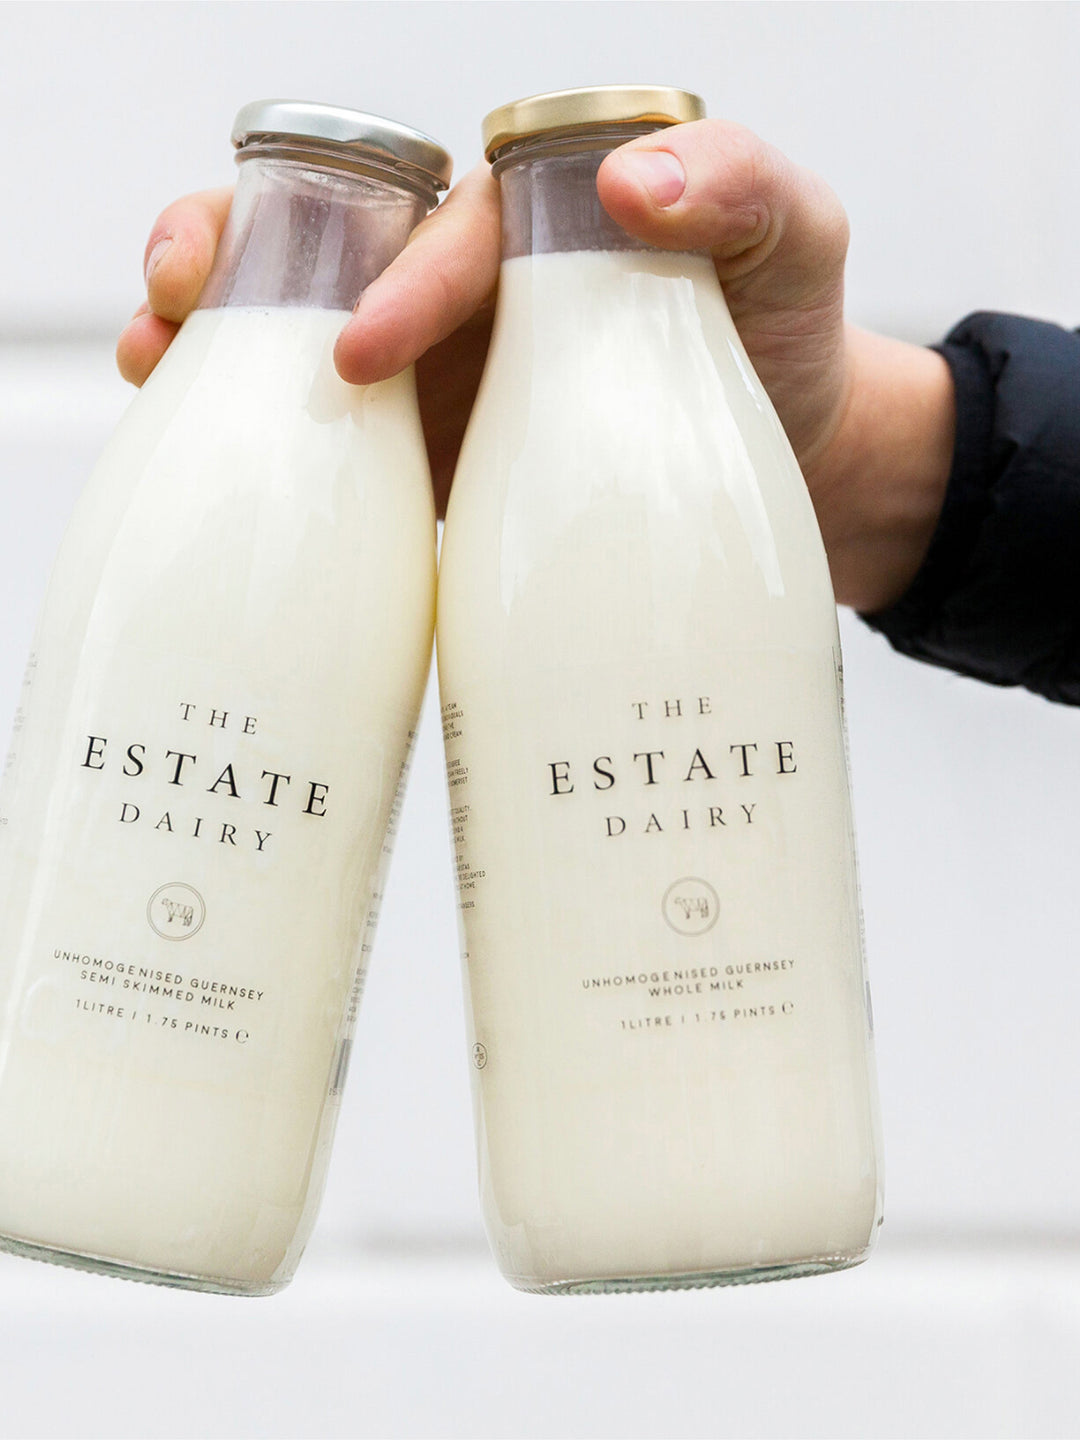 Hand holding two bottles of The Estate Dairy milk.